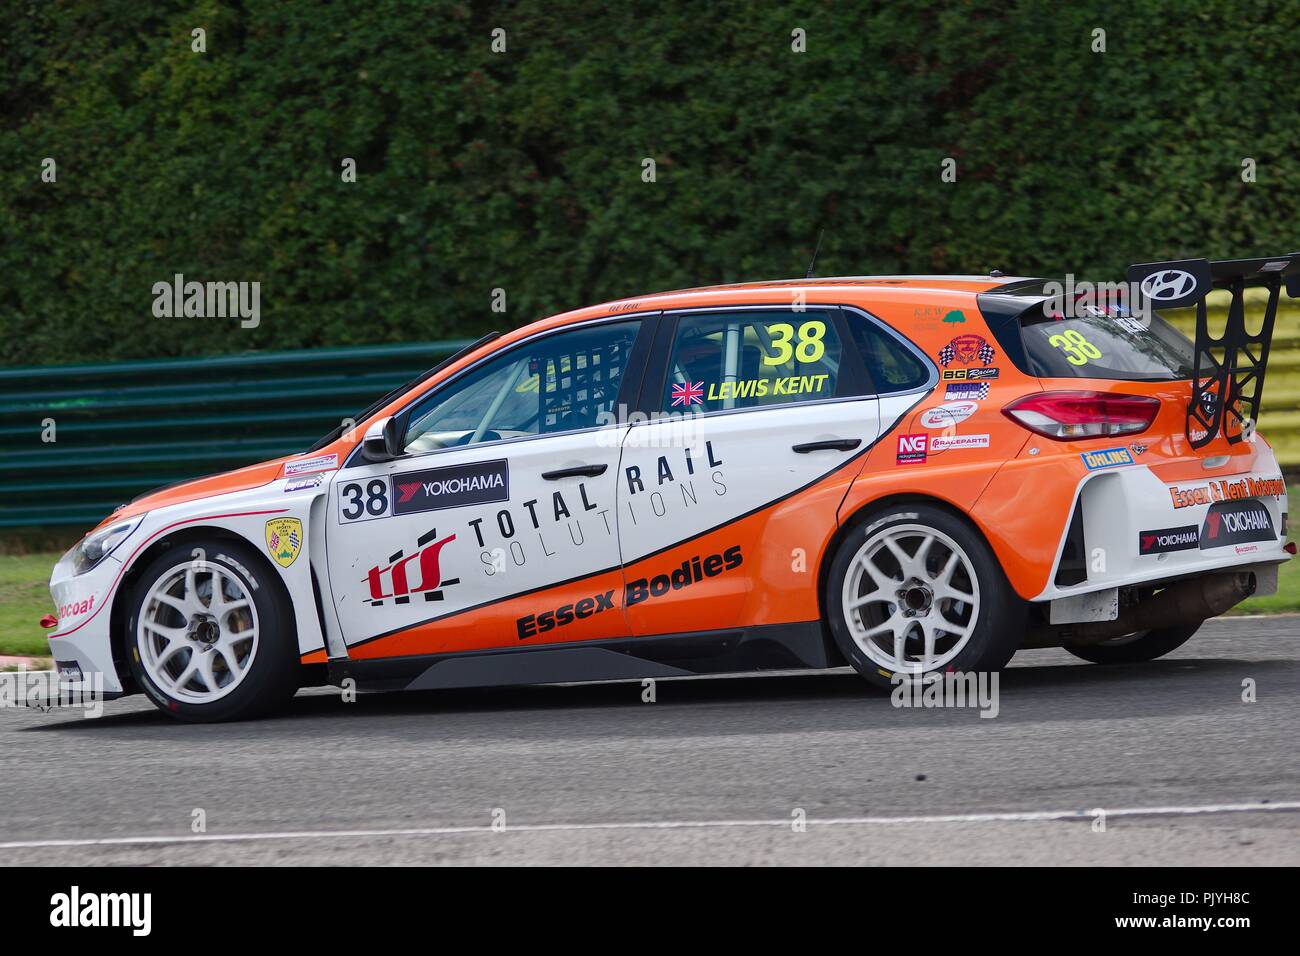 Dalton on Tees, UK. 9 September 2018. Lewis Kent driving a Hyundai i30 N for Essex & Kent Motorsport in round 12 of the TCR UK Touring Car Championship at Croft Circuit. Credit: Colin Edwards/Alamy Live News. Stock Photo